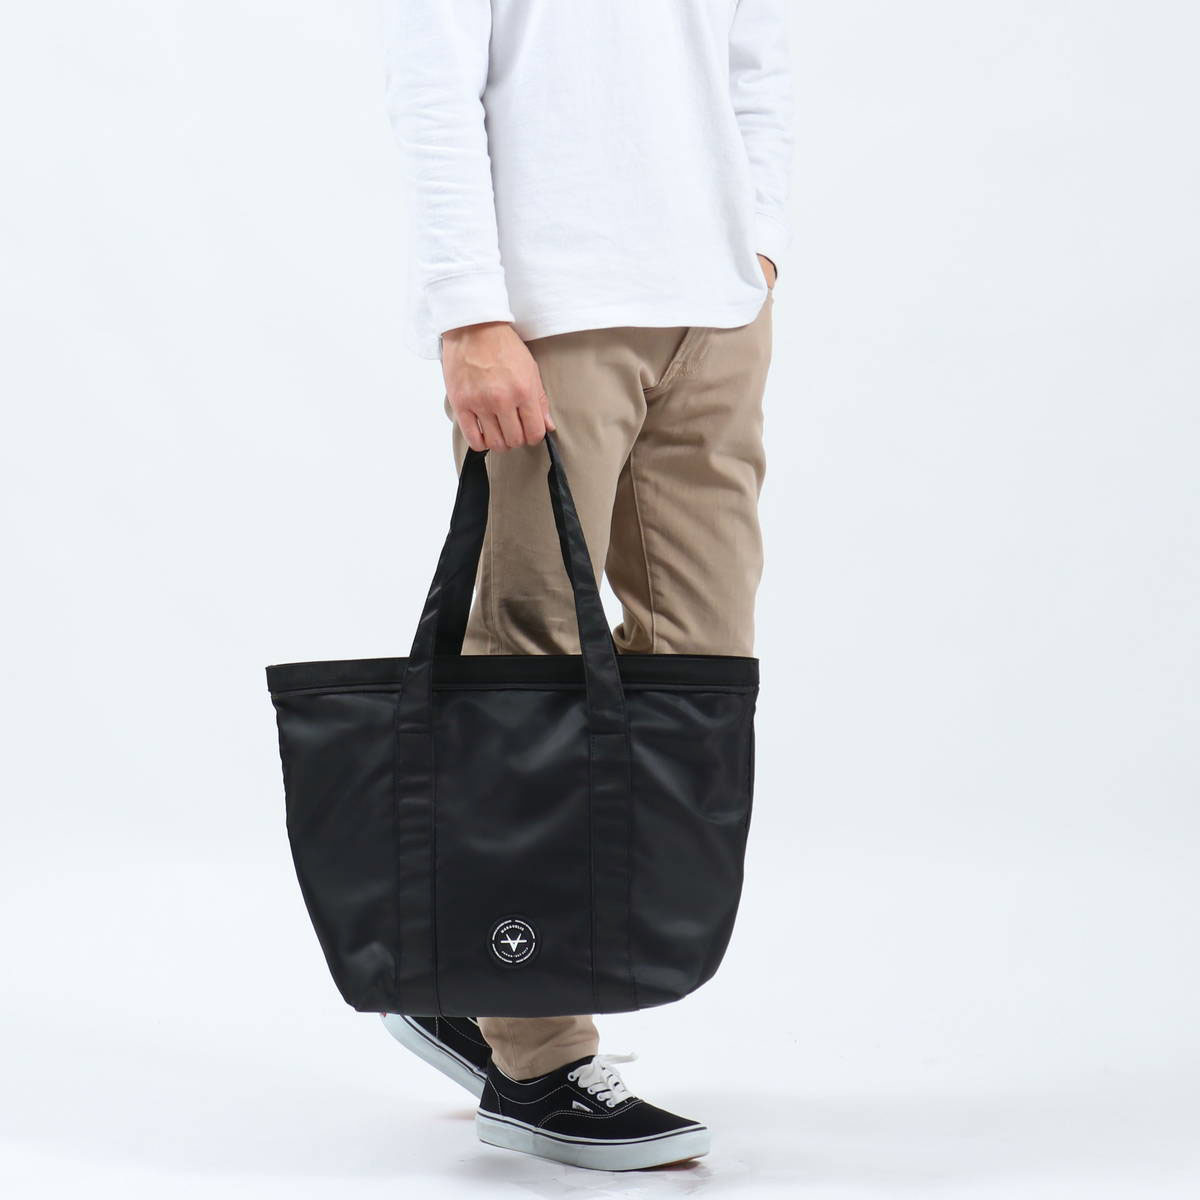 MAKAVELIC マキャベリック X-DESIGN LIMITED ETERNITY TOTE BAG 3121-10201